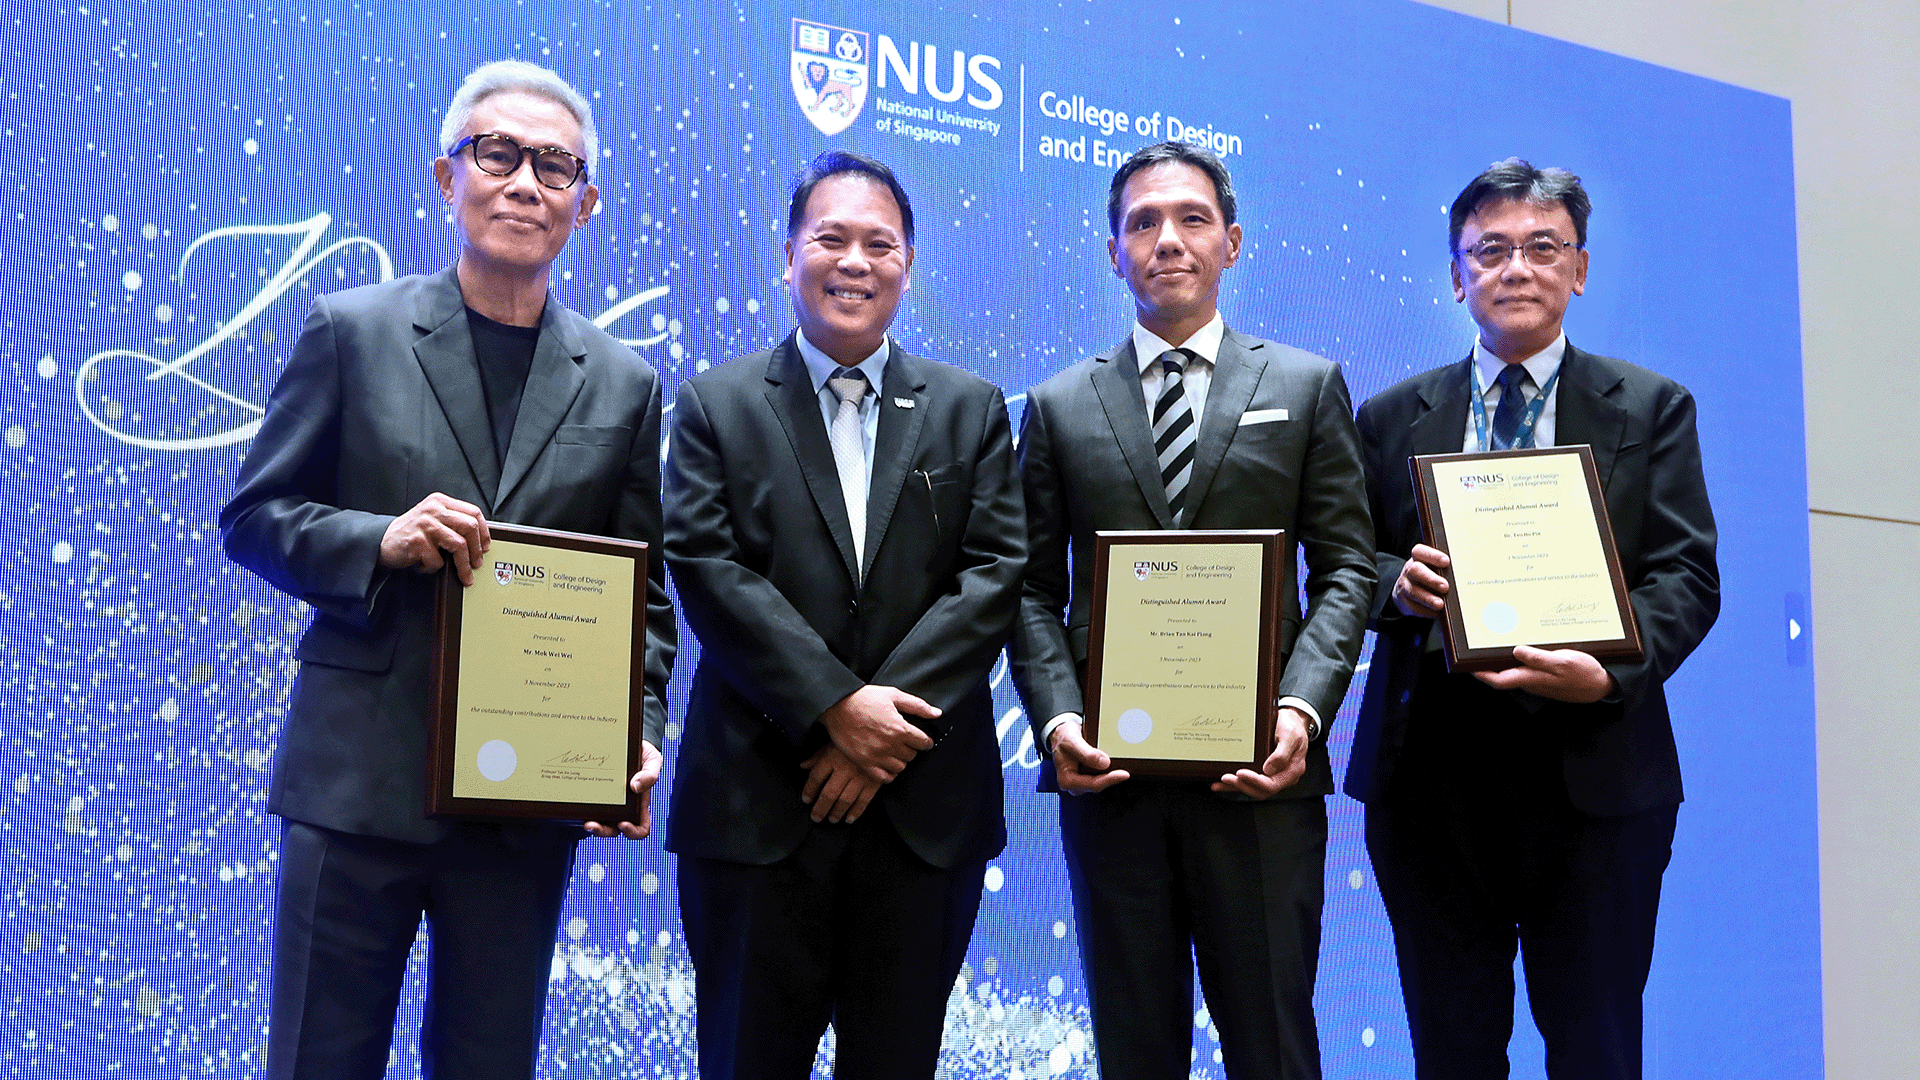 Recipients of the Distinguished Alumni Award 2023: (left) Mr. Mok Wei Wei; (centre right) Mr. Brian Tan Kai Piang; (right) Dr. Teo Ho Pin - represented by  Prof Michael Chew, Head Dept of Built Environment. Pictured with (centre left) CDE Acting Dean, Prof Teo Kie Leong.